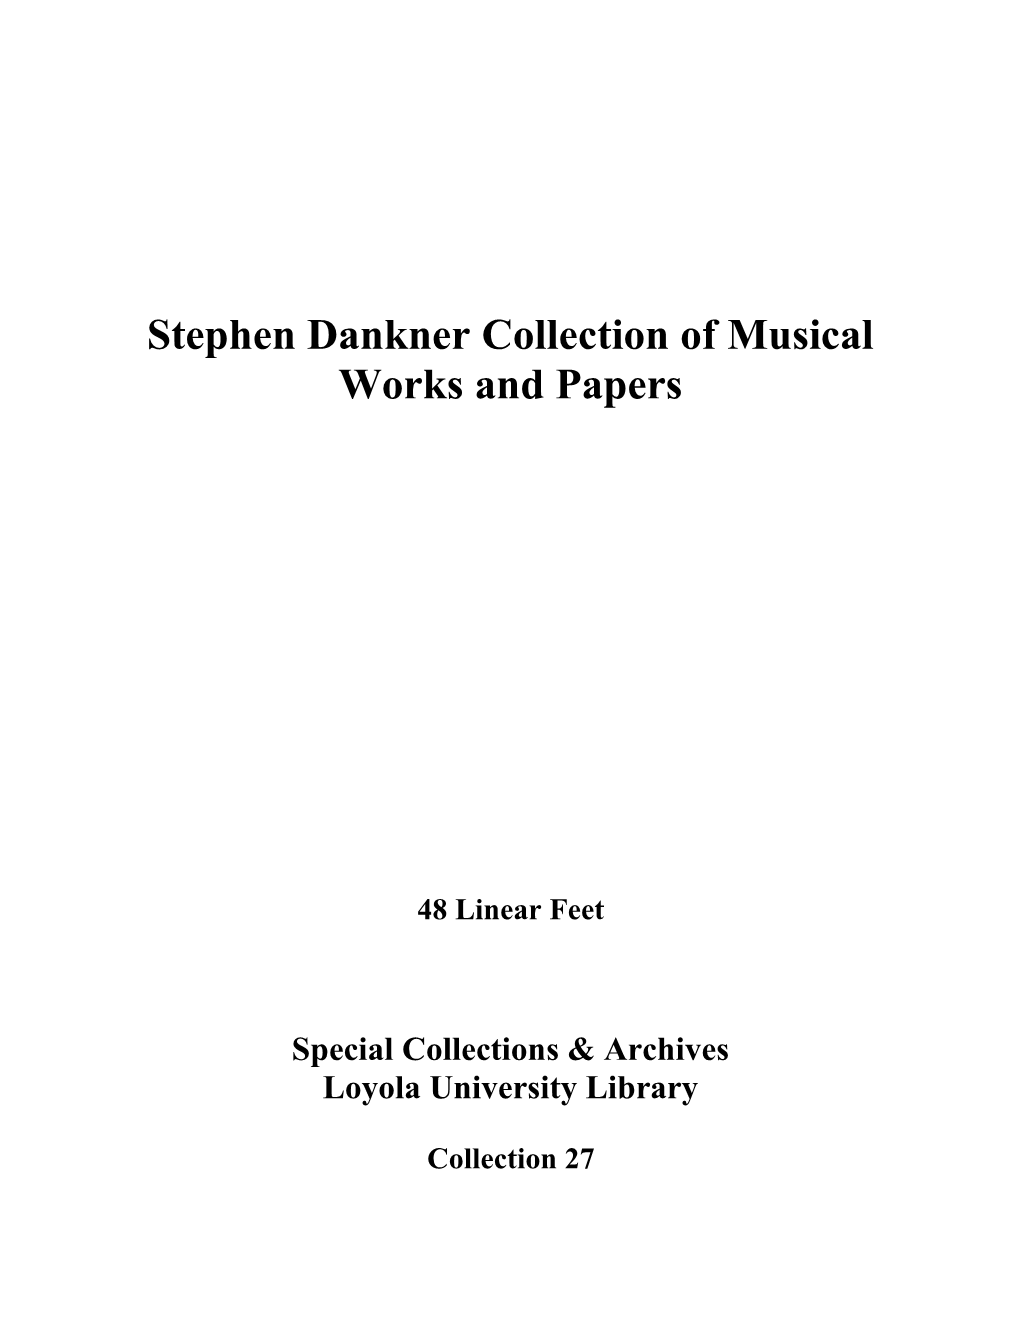 Stephen Dankner Collection of Musical Works and Papers